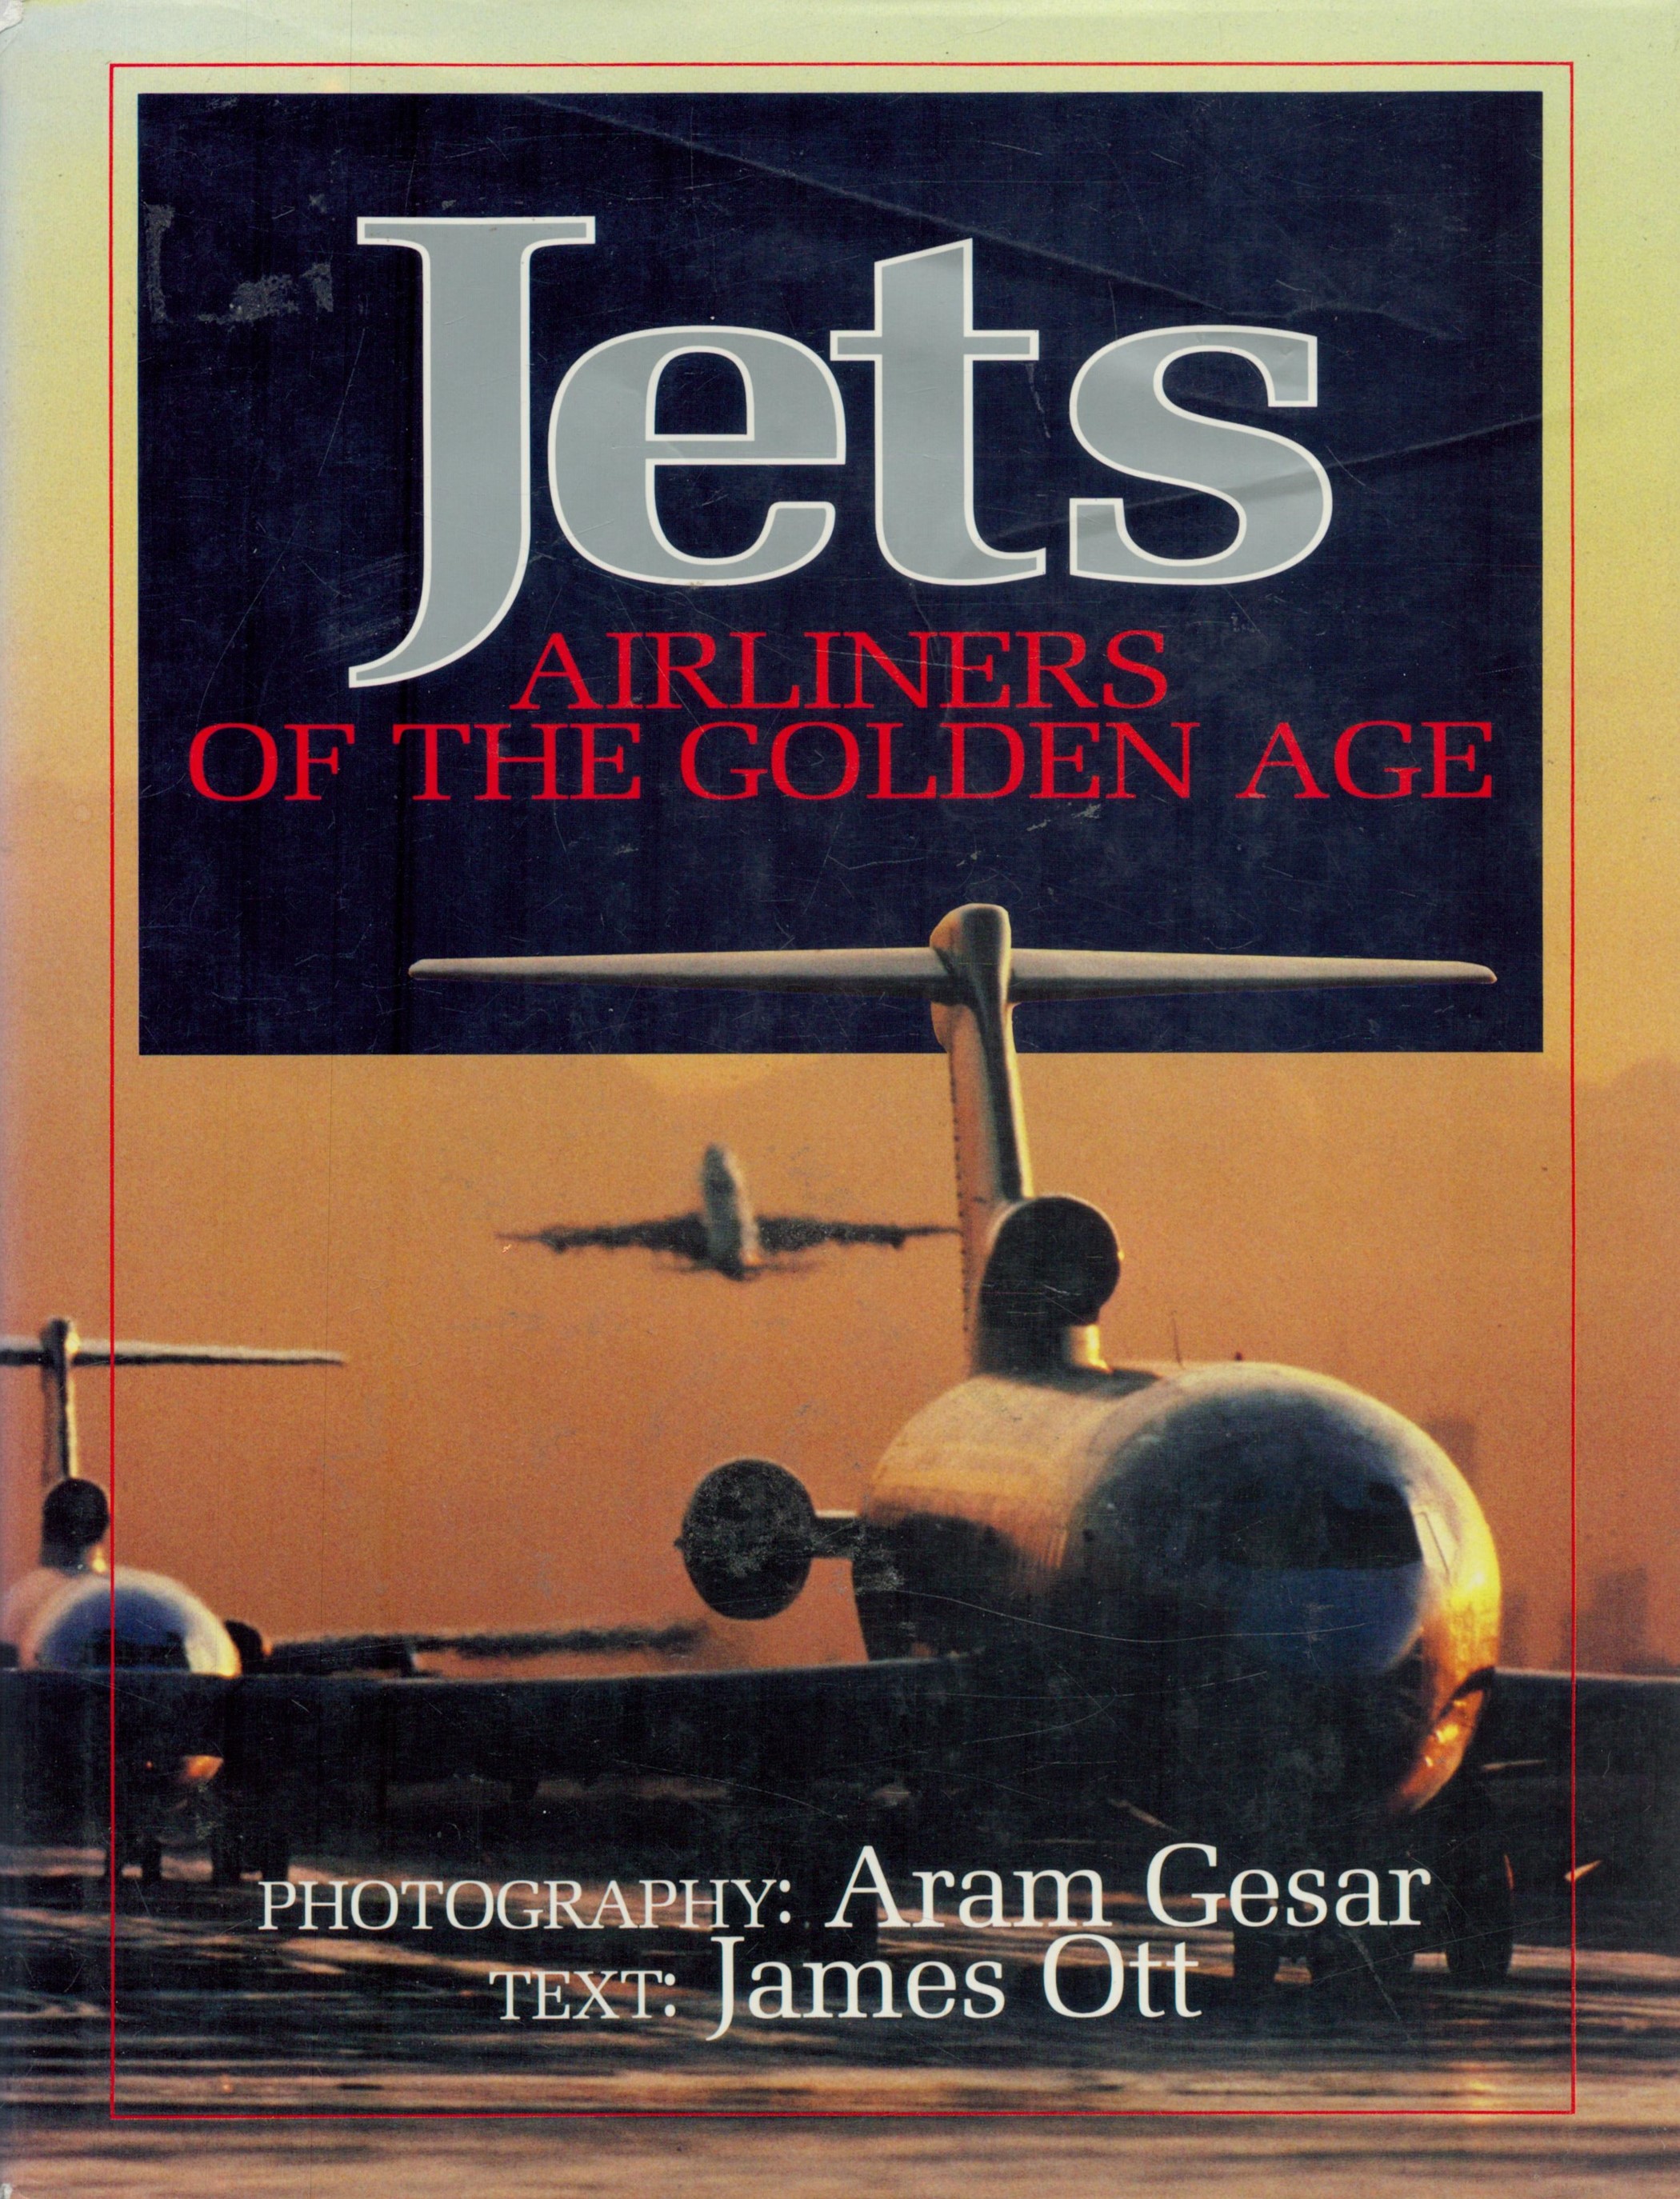 Jet Aircraft Publications Includes Jets - Airliners of The Golden Age by James Ott and Aram Gesar